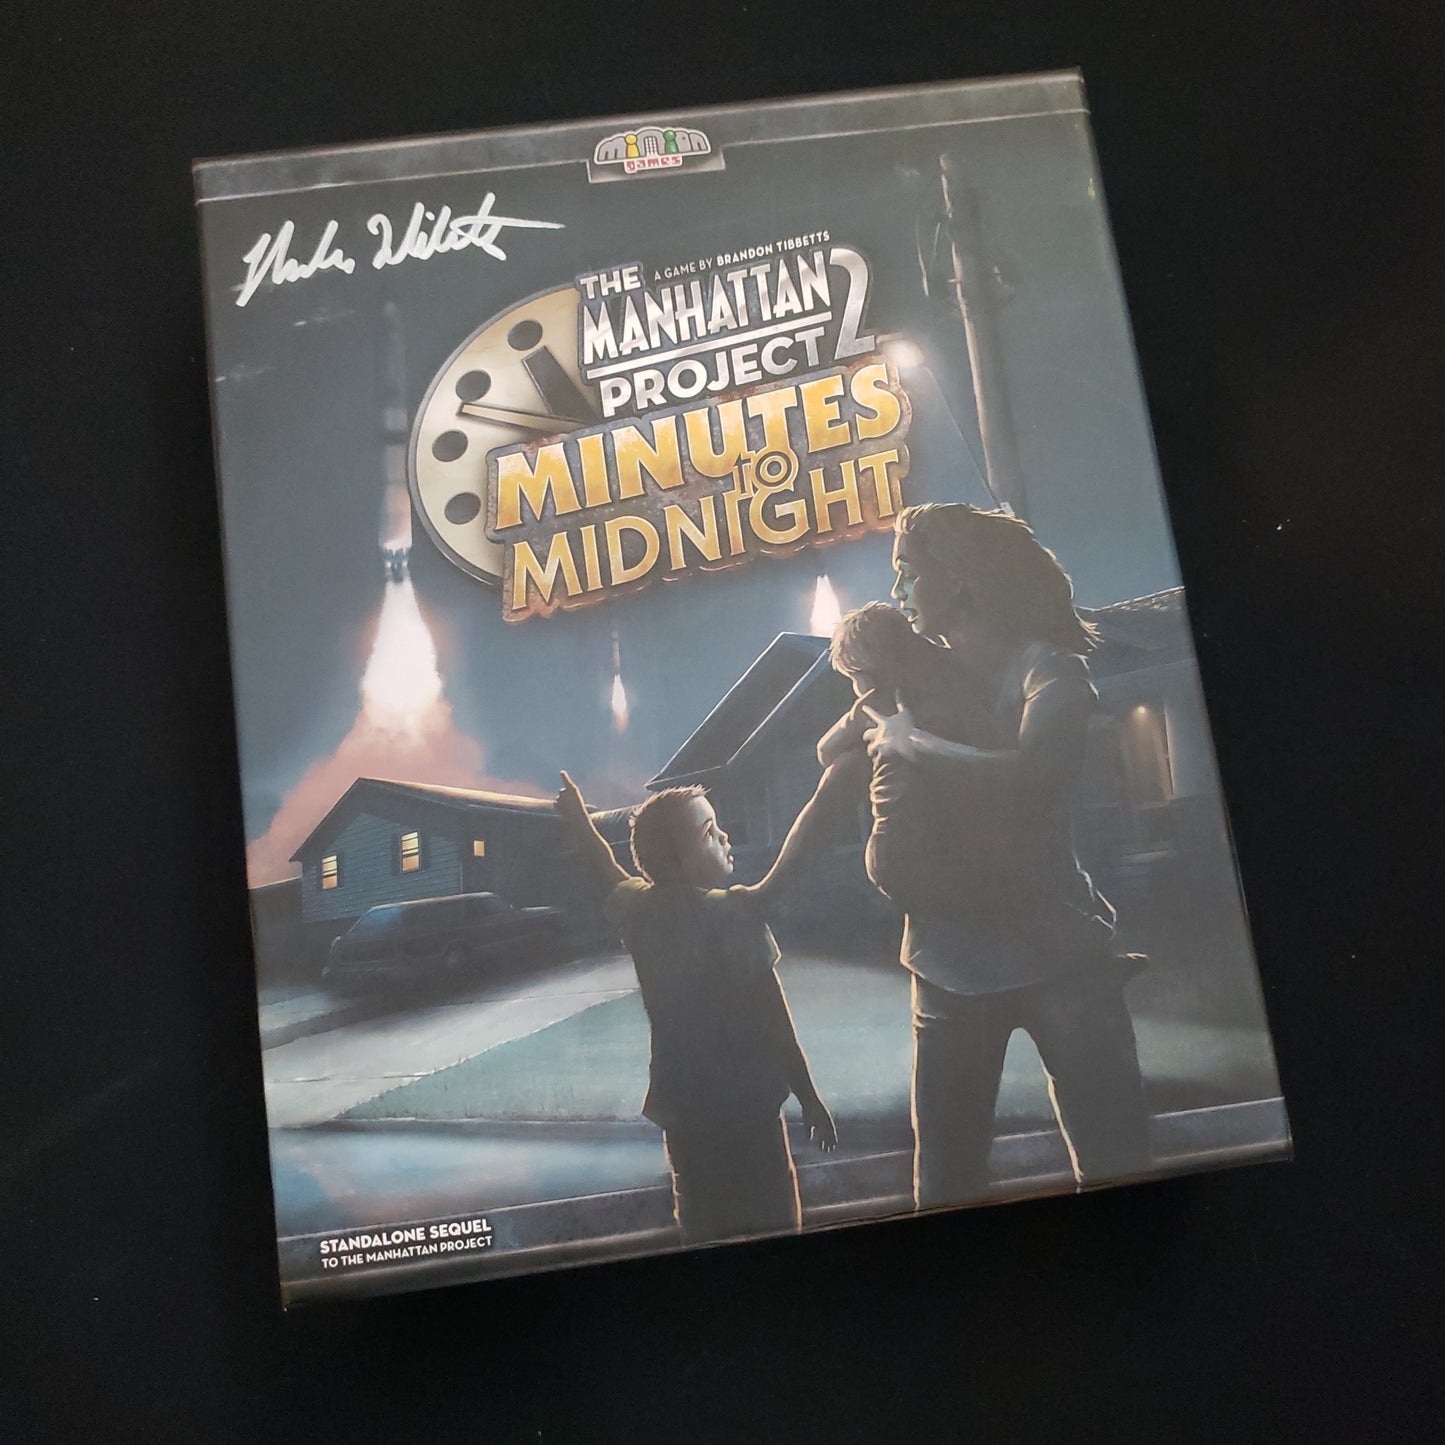 Image shows the front cover of the box of the Manhattan Project 2: Minutes to Midnight board game